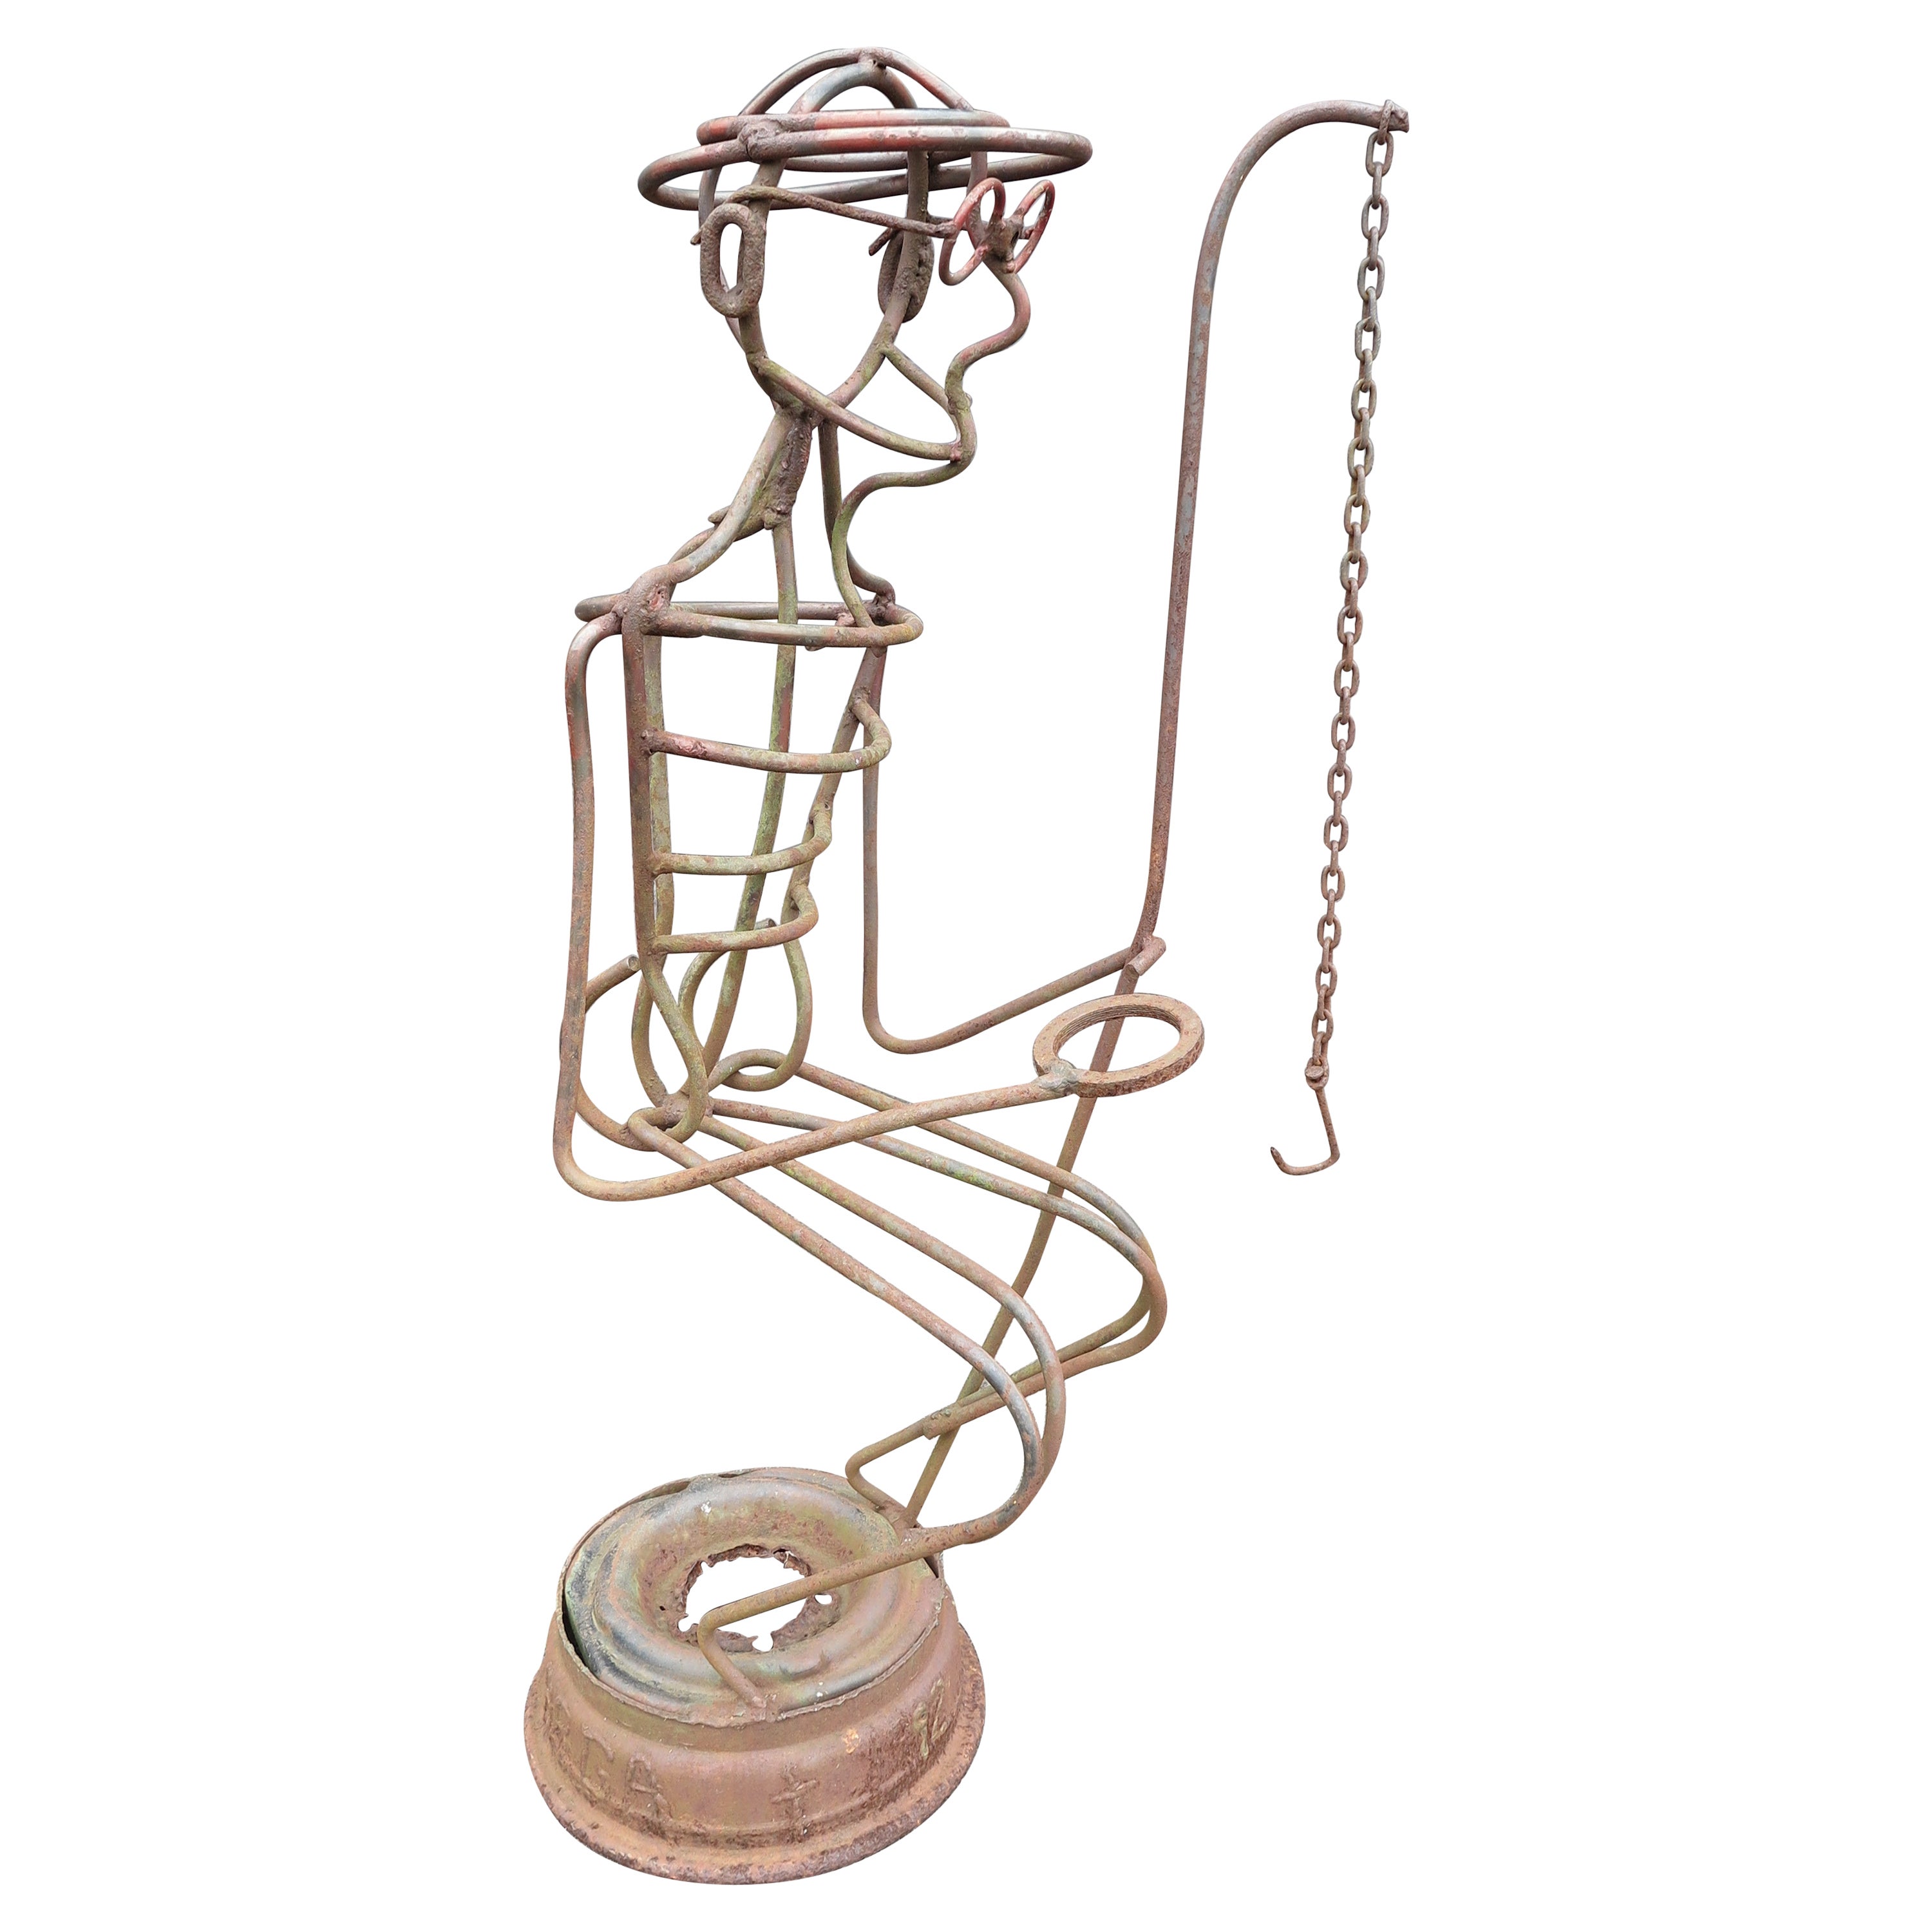 A.R. Gately Metal Sculpture "Fisherman" For Sale